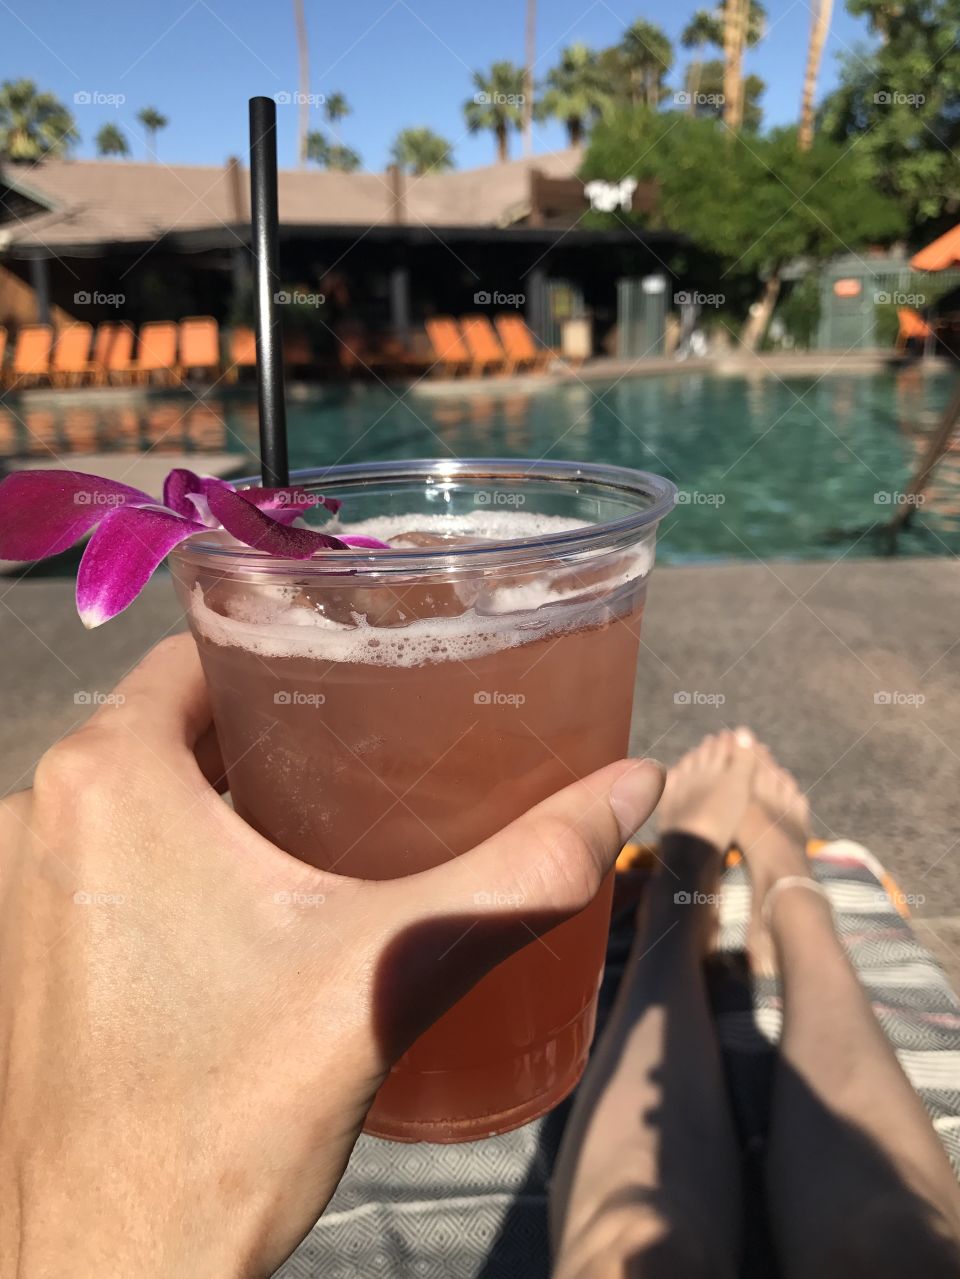 Cheers! A tropical cocktail by the pool. Having a drink in the sun. Pink cocktail with flower. California holiday.